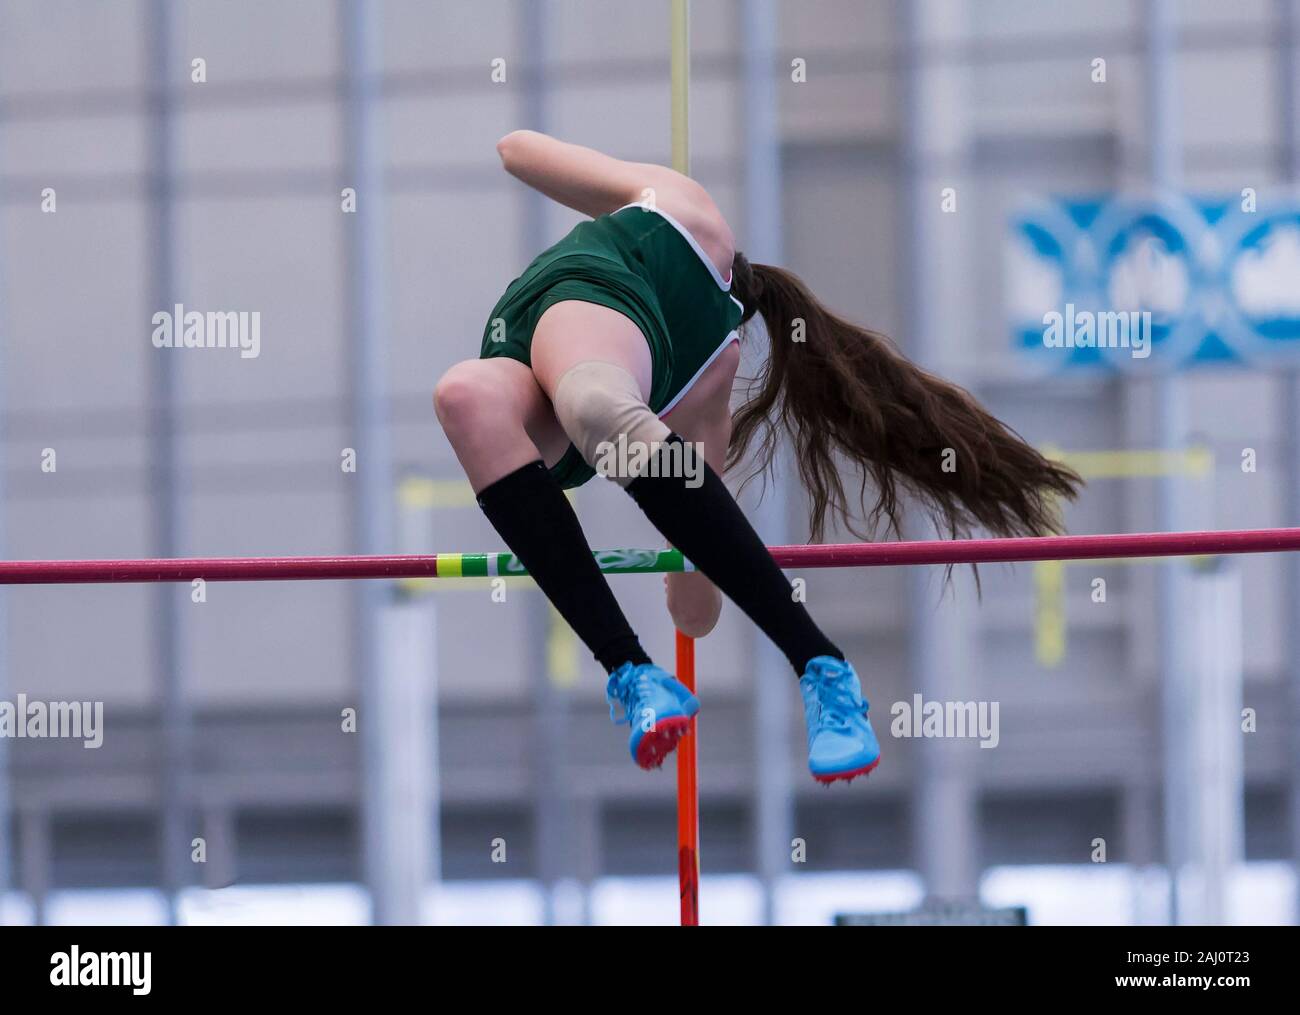 A high school girl is clearing the bar during a pole vault competition at a track meet. Stock Photo